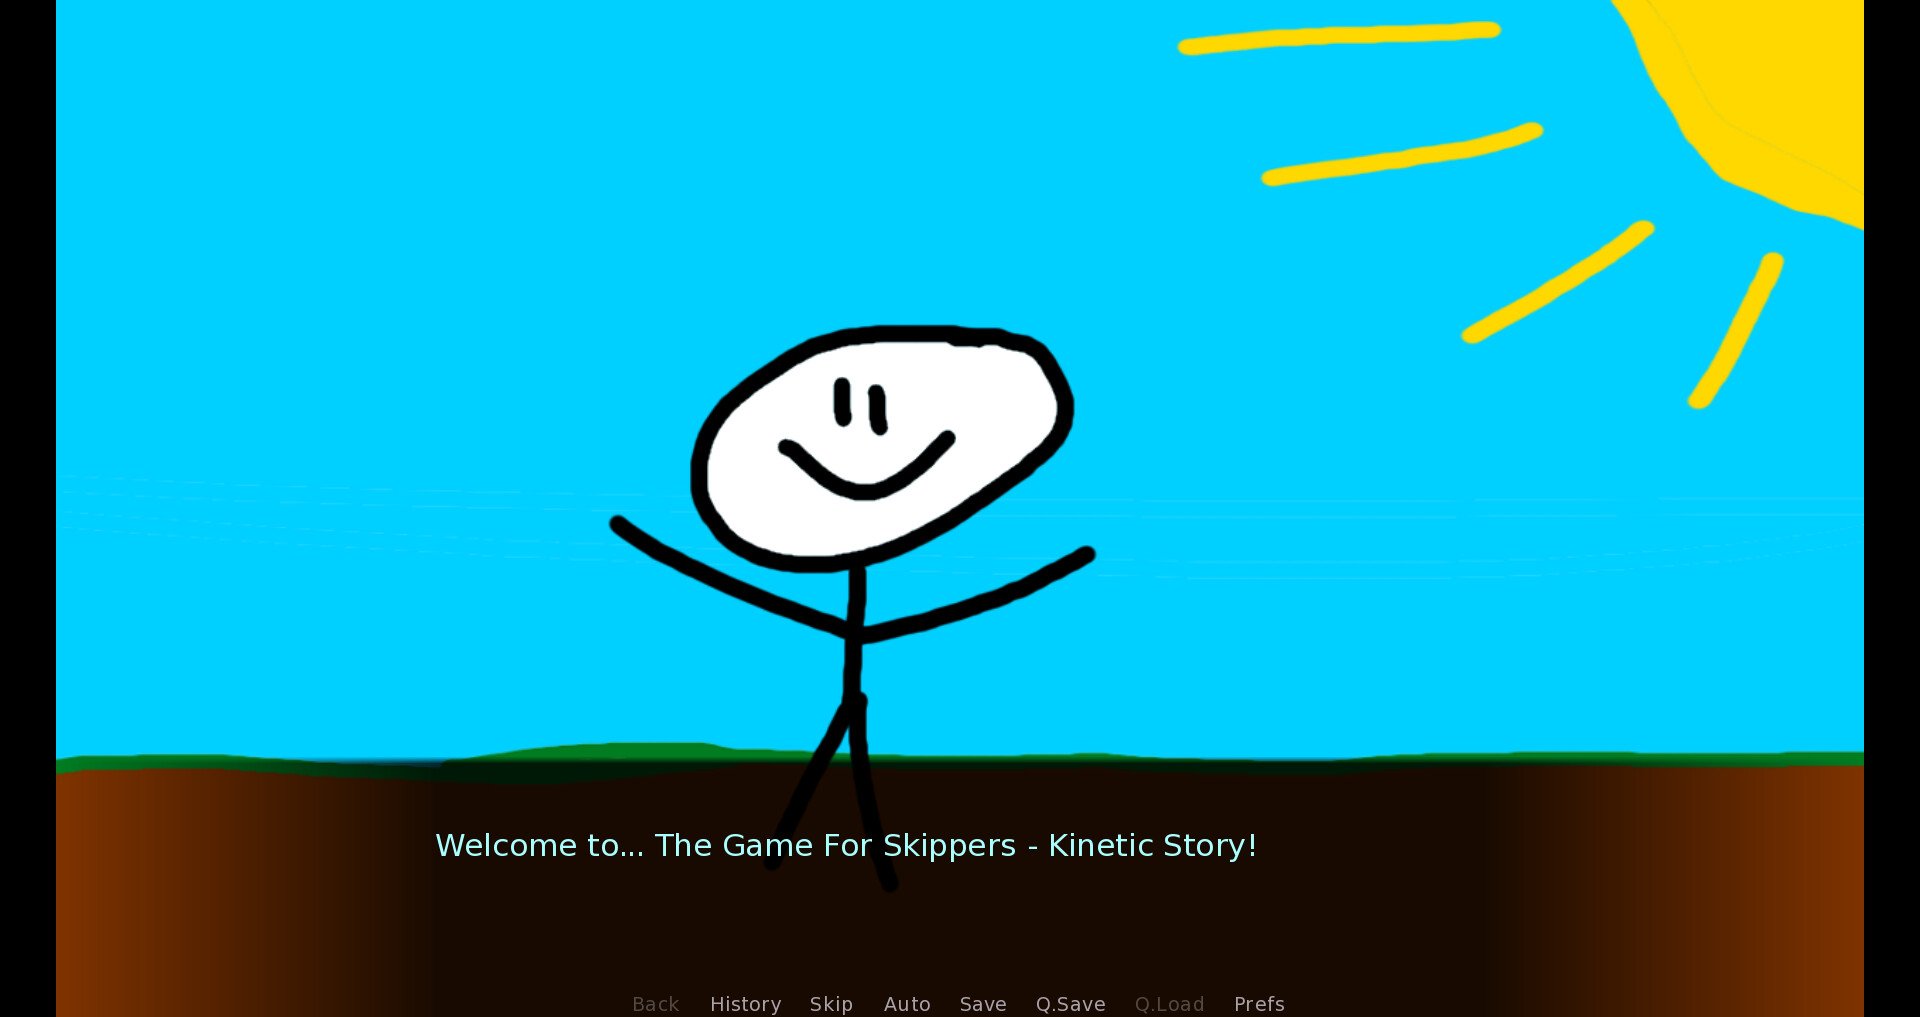 The Game For Skippers - Kinetic Story Featured Screenshot #1